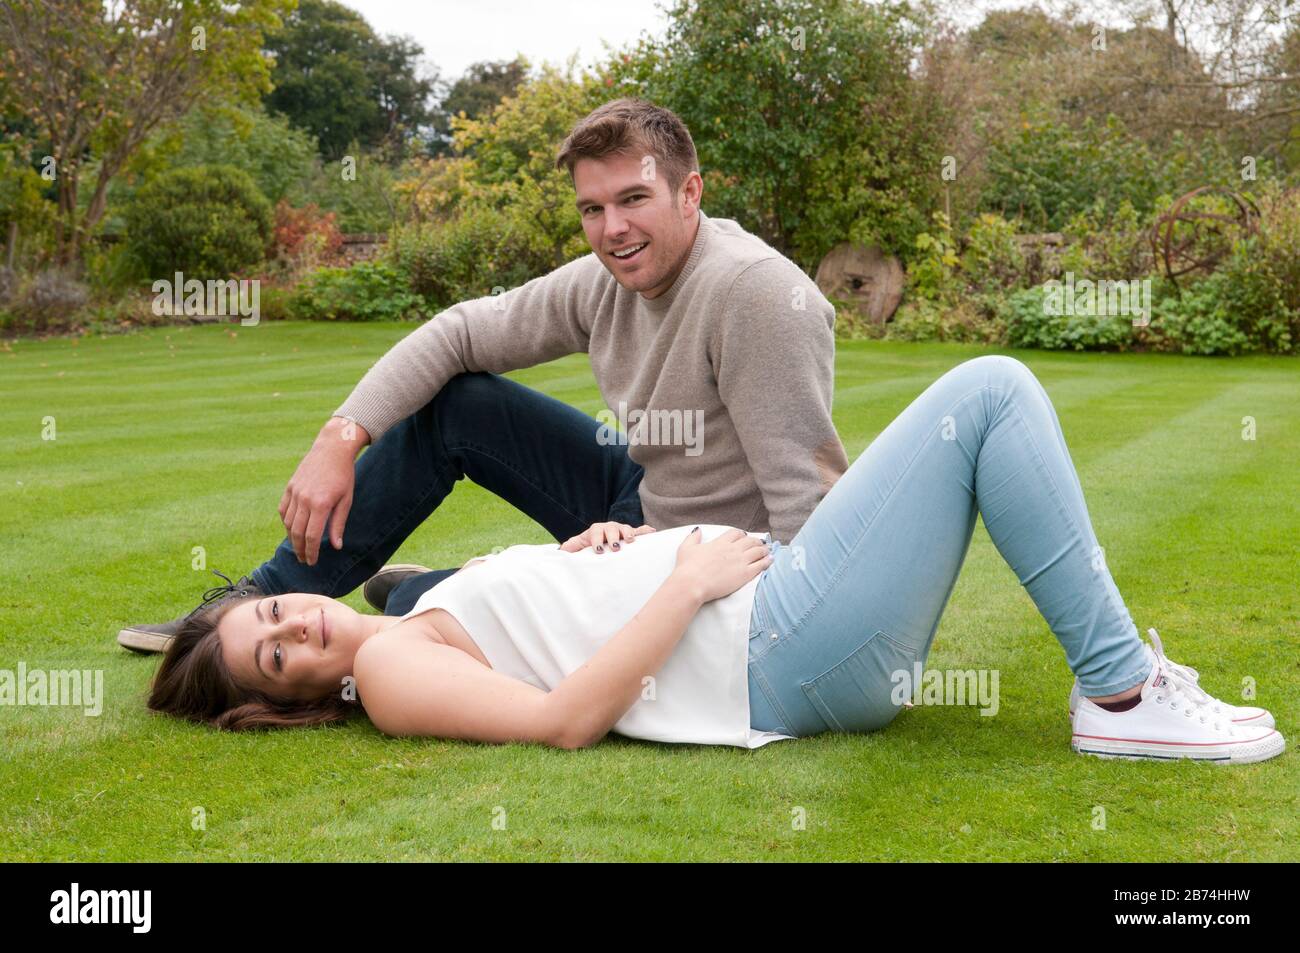 Beautiful pregnant young woman lying down on the grass with her partner sitting next to her Stock Photo